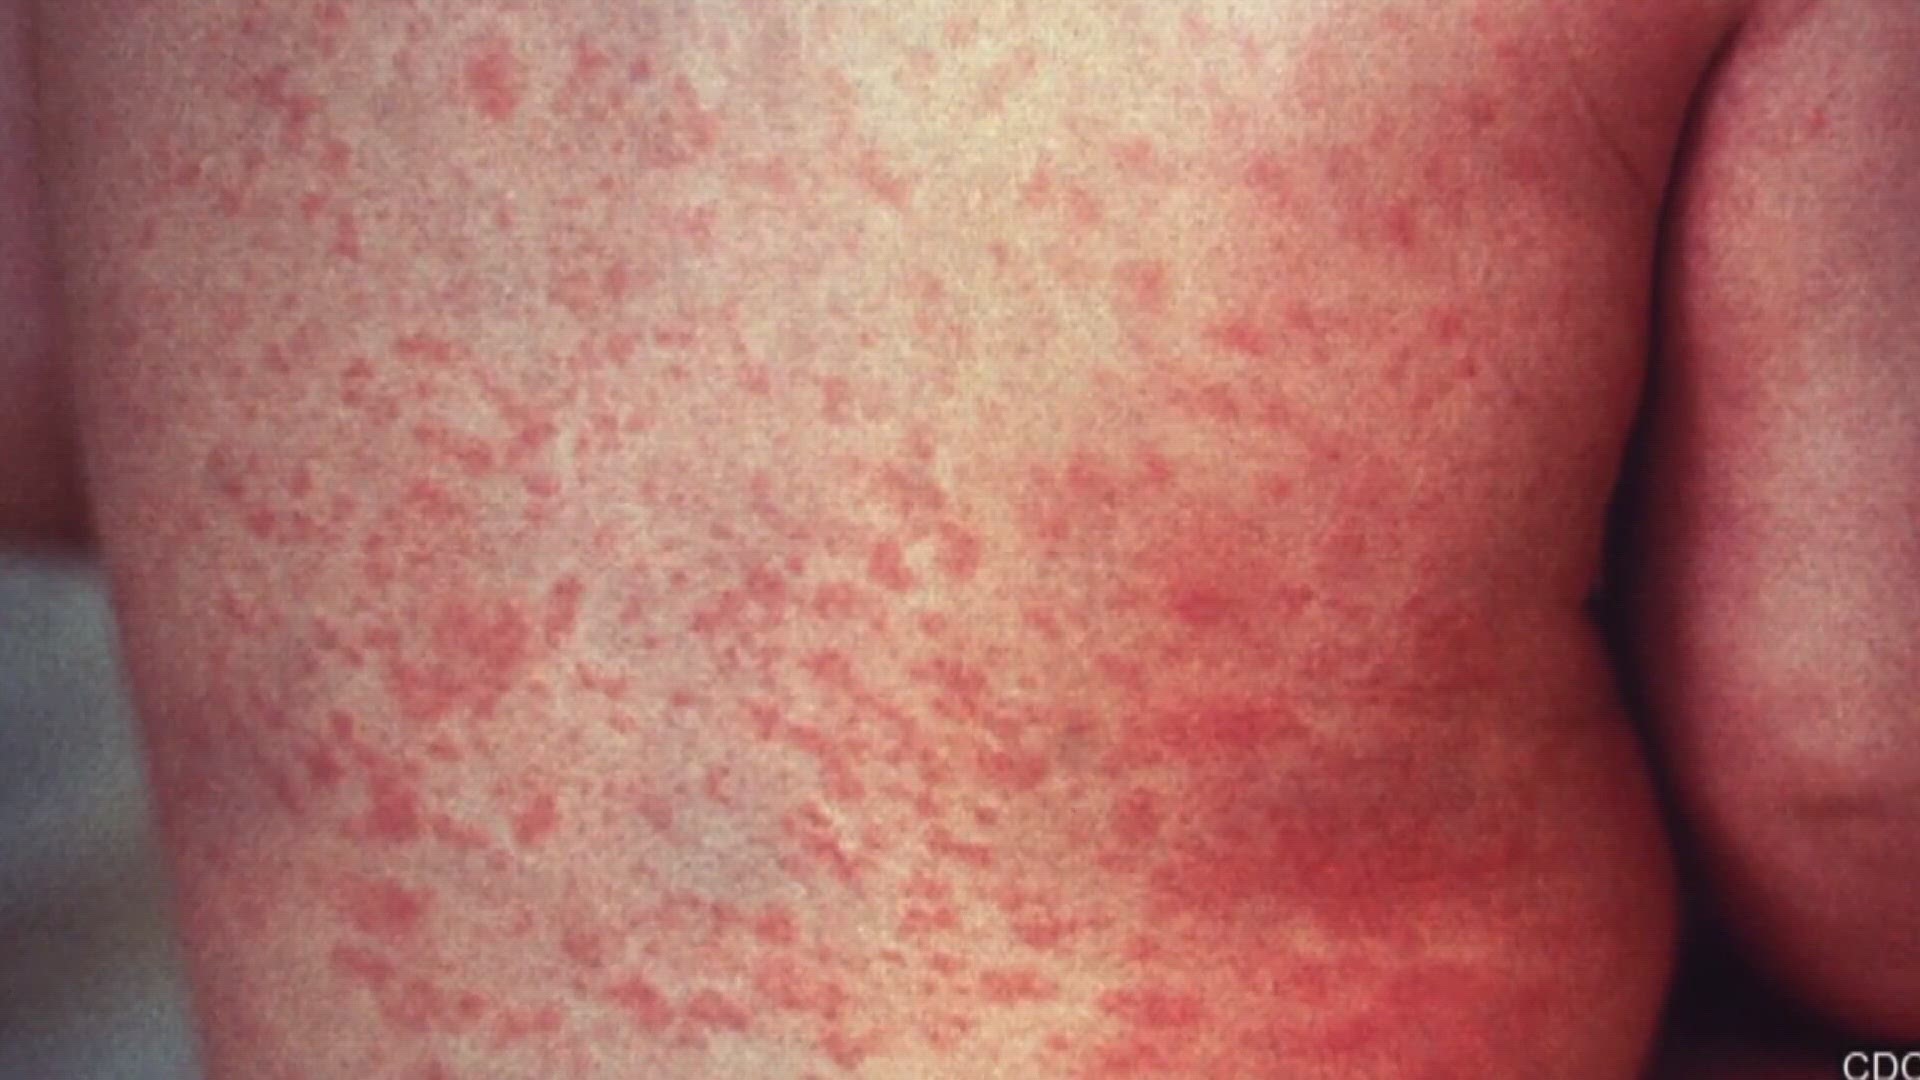 An international visitor confirmed to have measles was at two locations in the Valley, health officials said.